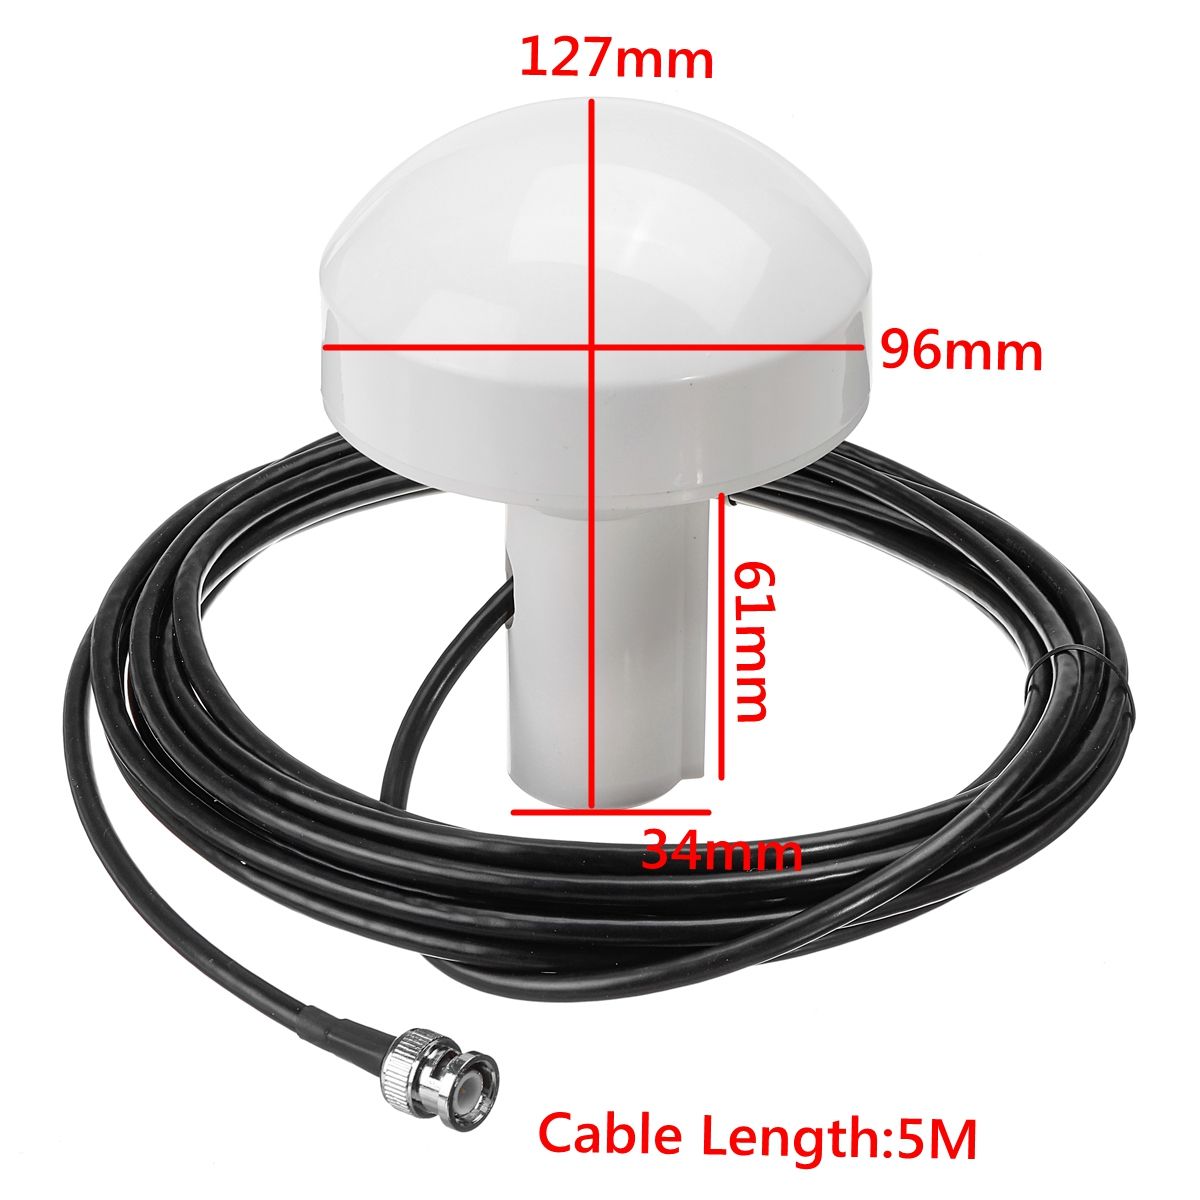 GPS-Active-Marine-Navigation-Antenna-5-Meters-With-BNC-Male-Plug-Connector-New-1019250